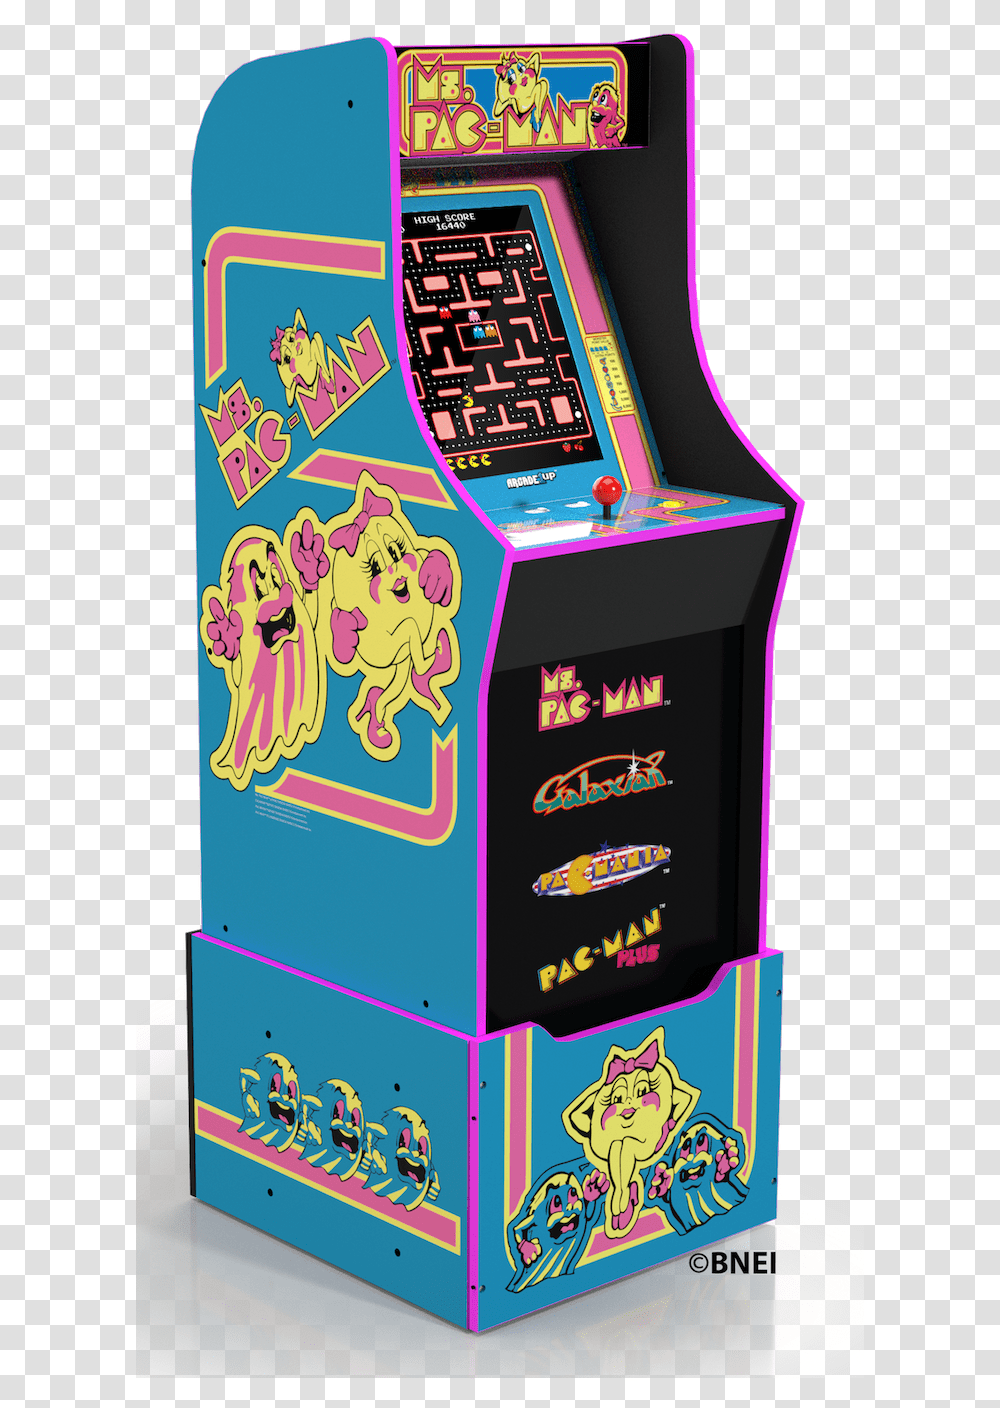 Ms Pacman Arcade Machine With Riser Arcade1up Mrs Pacman Walmart, Arcade Game Machine, Pac Man Transparent Png